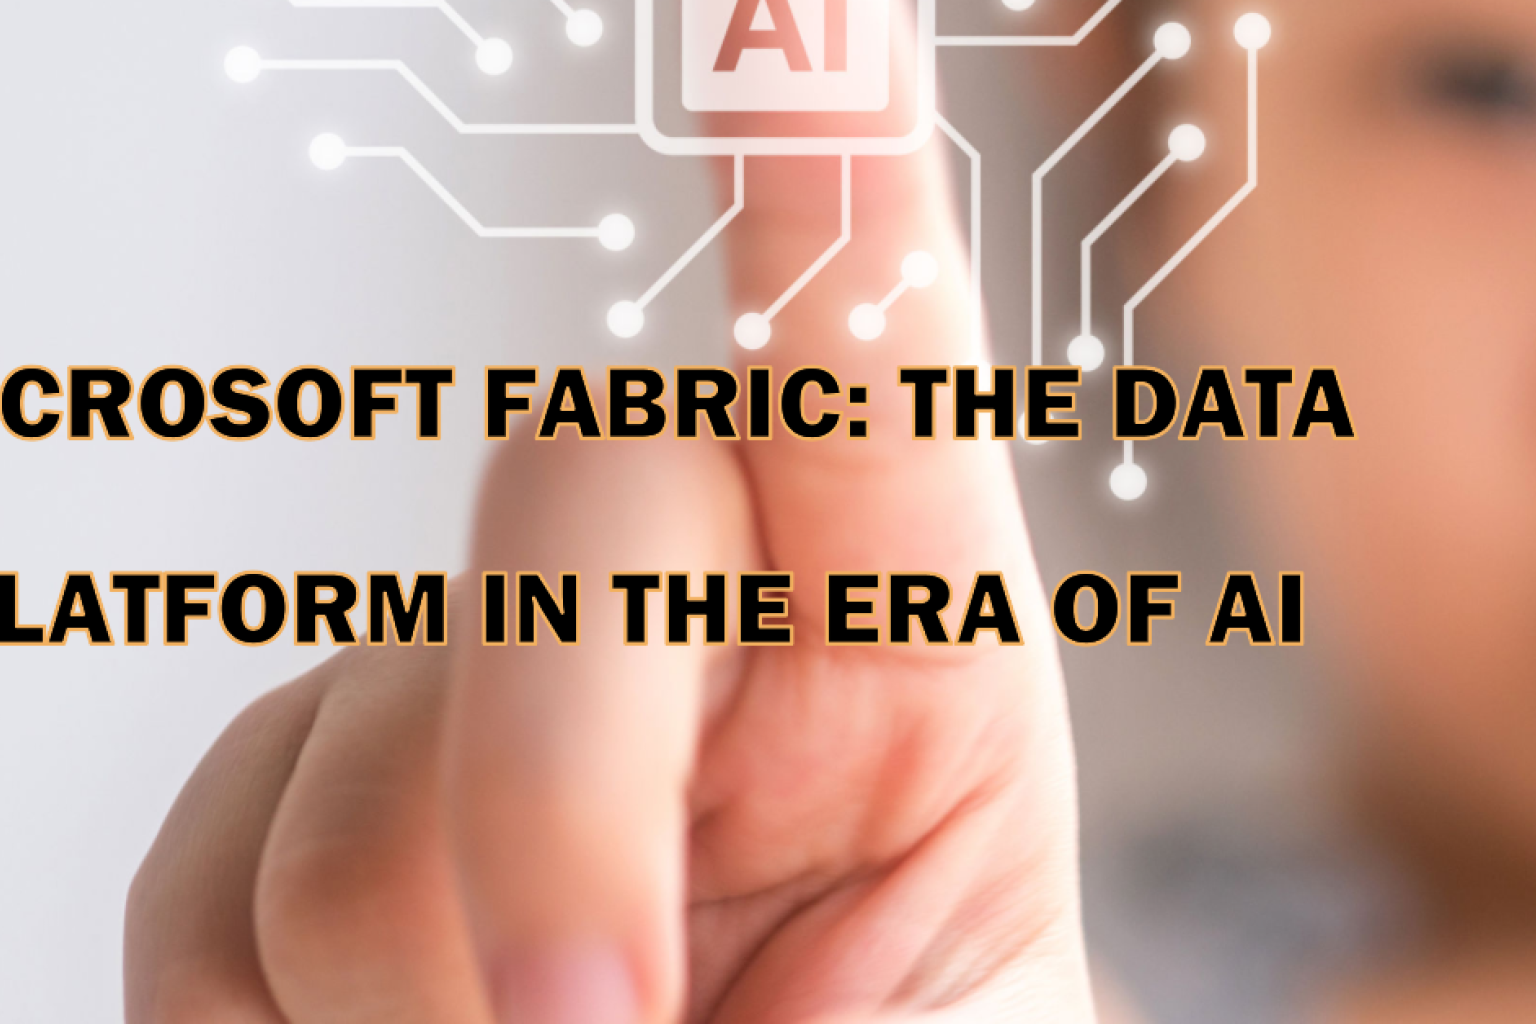 Improve your enterprise’s data analytics capabilities with Microsoft Fabric - a unified platform powered by AI, supporting data movement, engineering, and integration. Explore now!